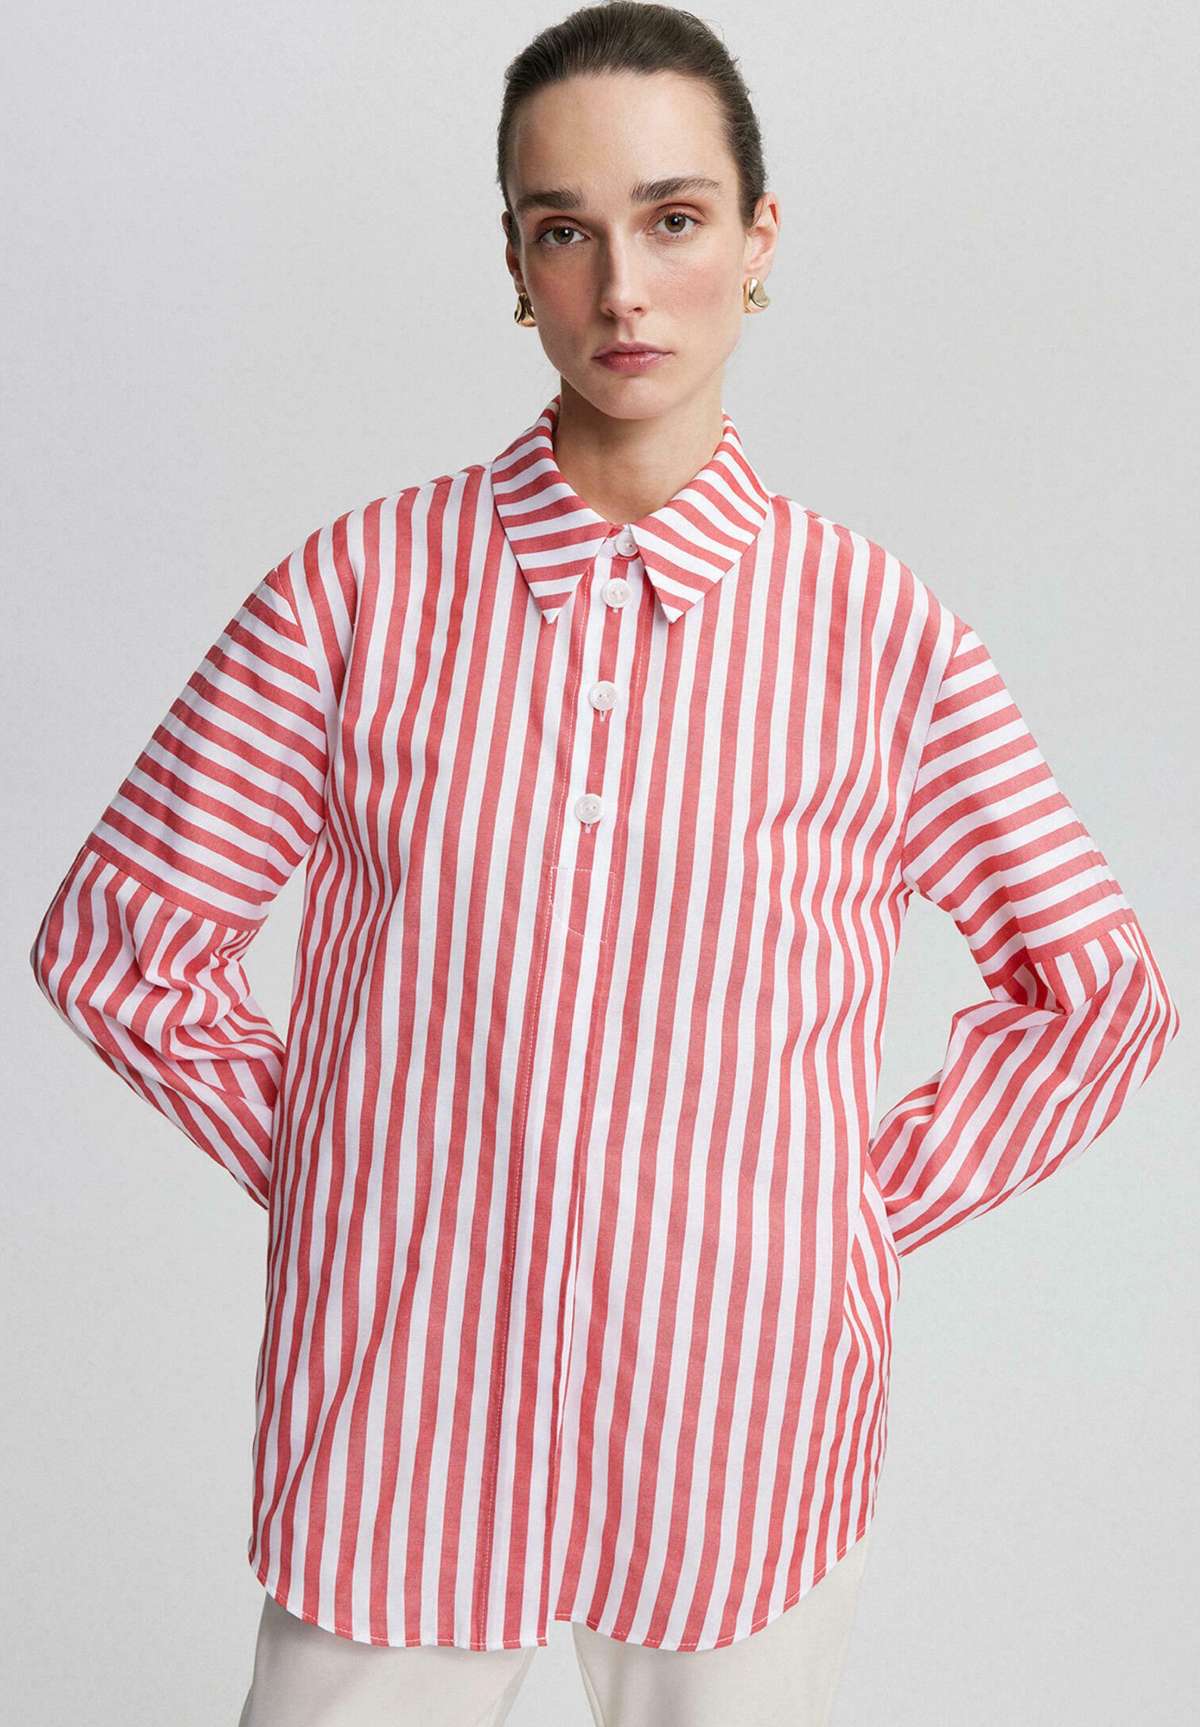 Блуза-рубашка STRIPED WITH BUTTON DETAIL